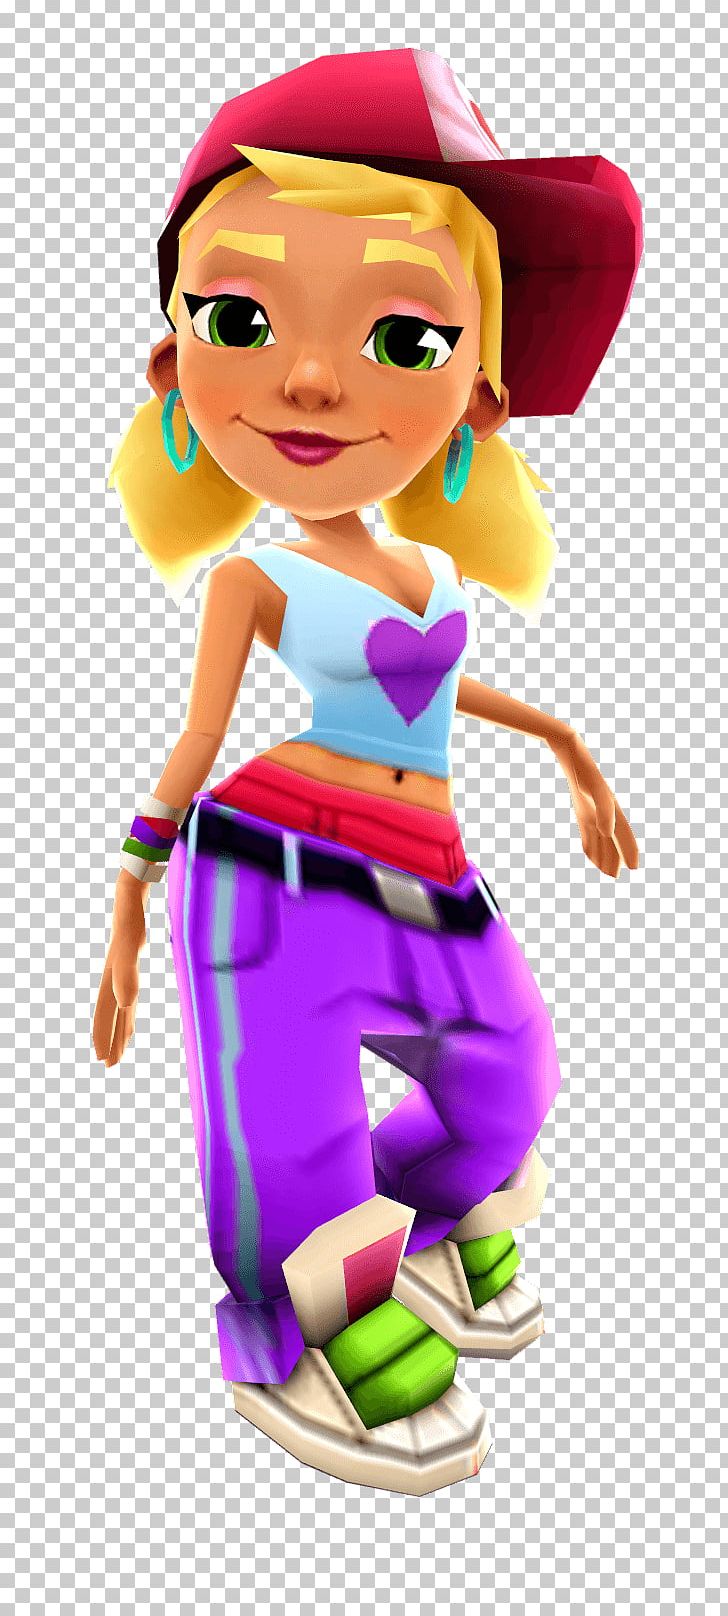 Subway Surfers Wikia PNG, Clipart, Art, Cartoon, Character, Com, Doll Free PNG Download